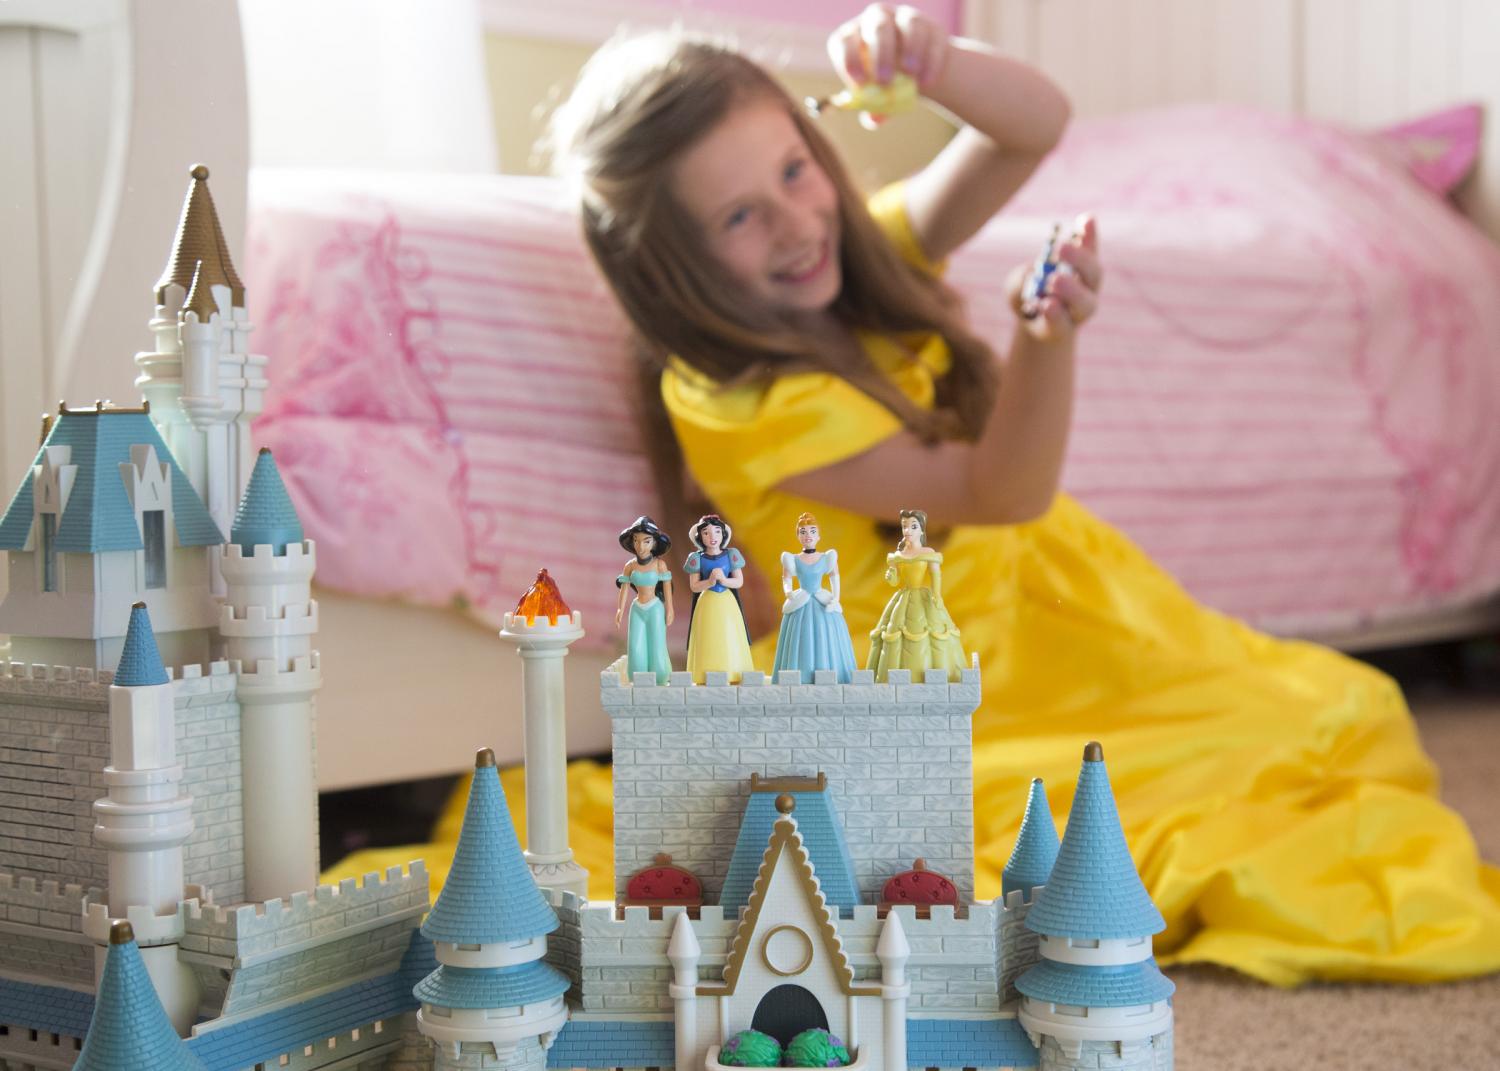 Study finds Disney Princess culture magnifies stereotypes in young